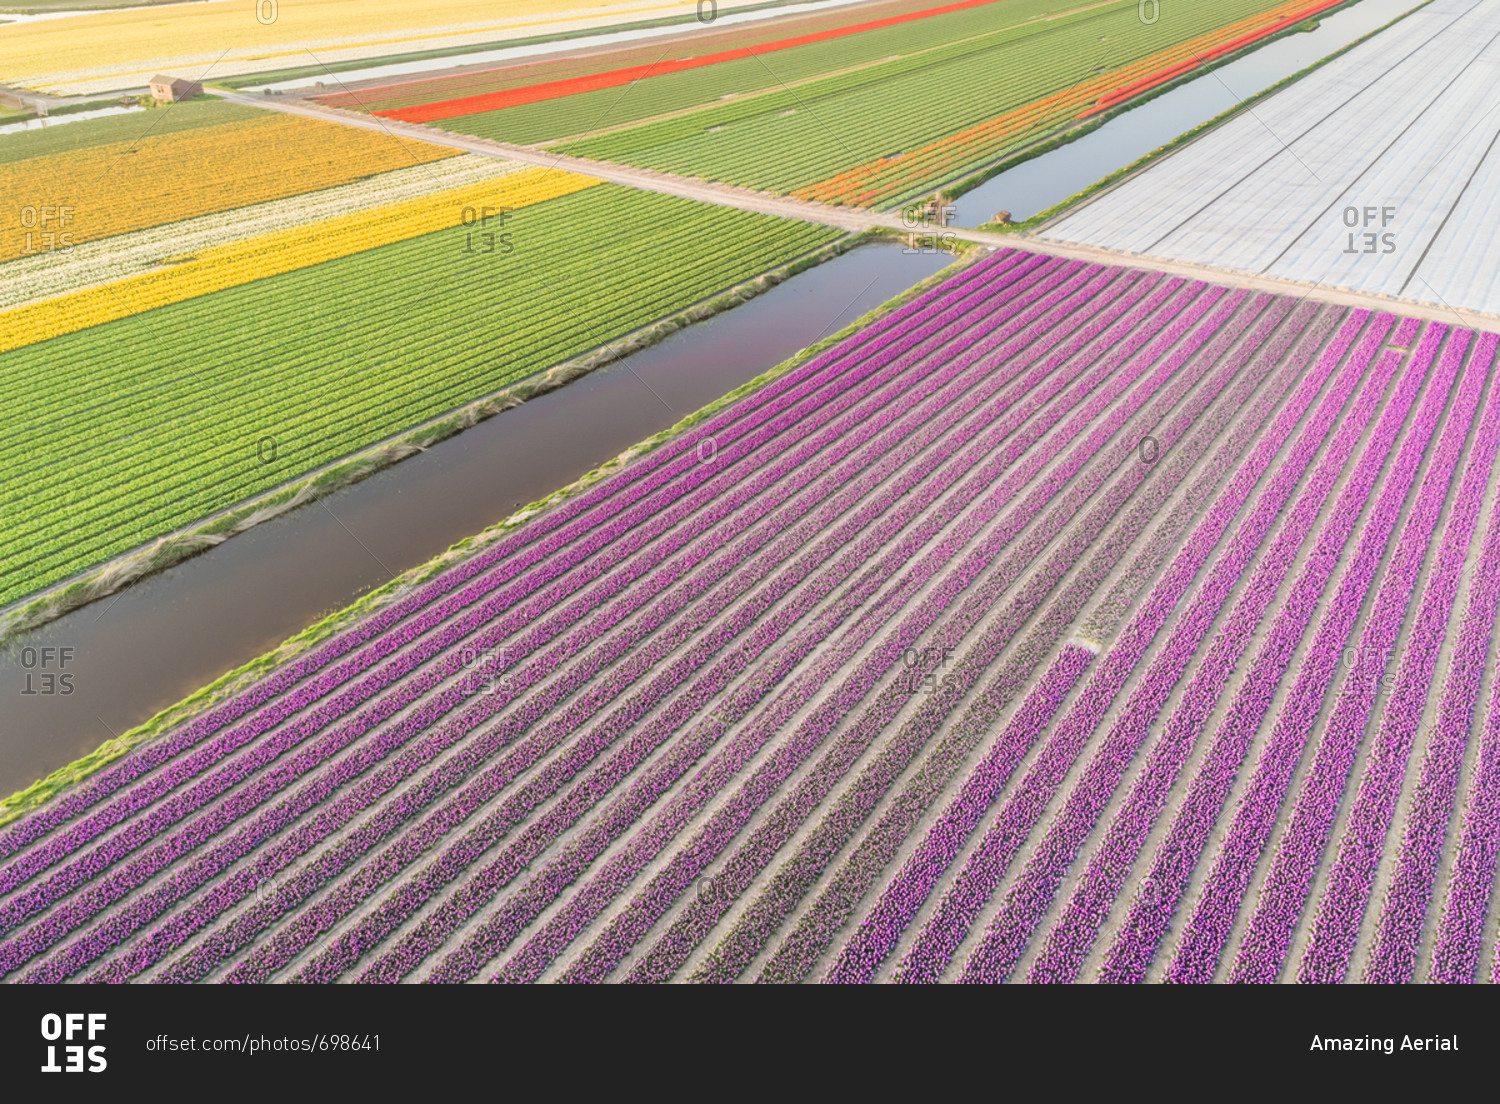 Amazing aerial view of colorful blossoming fields of tulips in Lisse, Netherlands